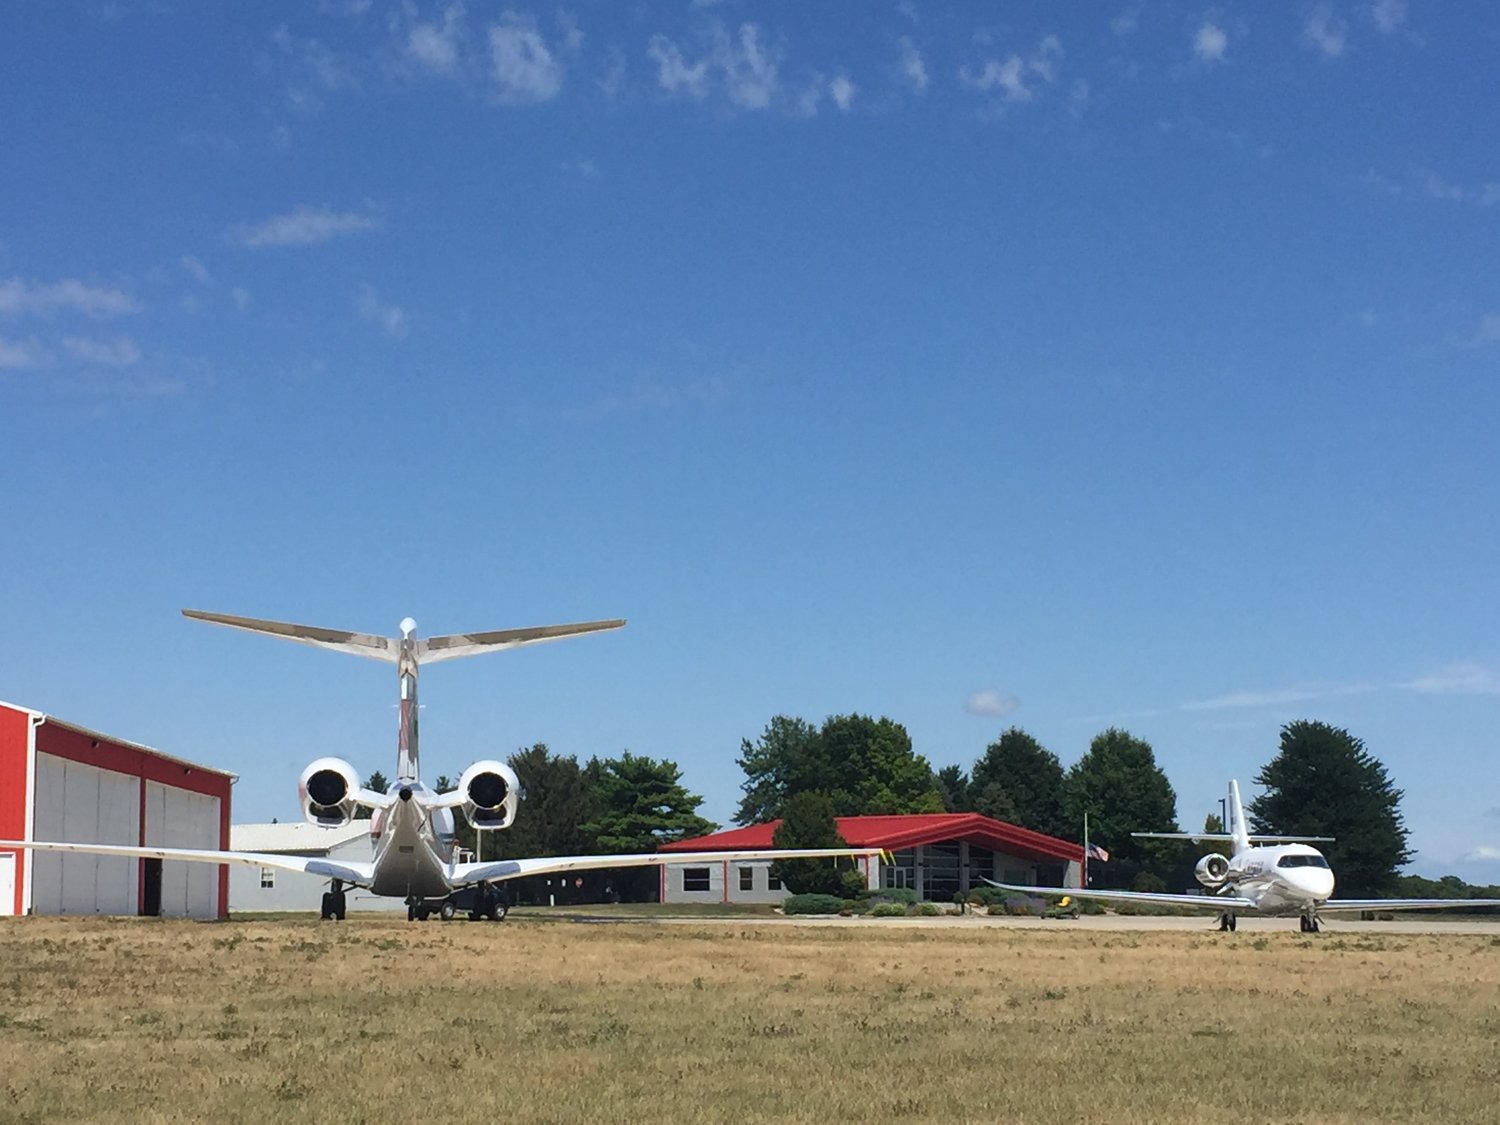 Airplanes sit parked at Crawfordsville Regional Airport. A planned apron expansion would add nearly 30,000 additional square-feet of aircraft parking space.